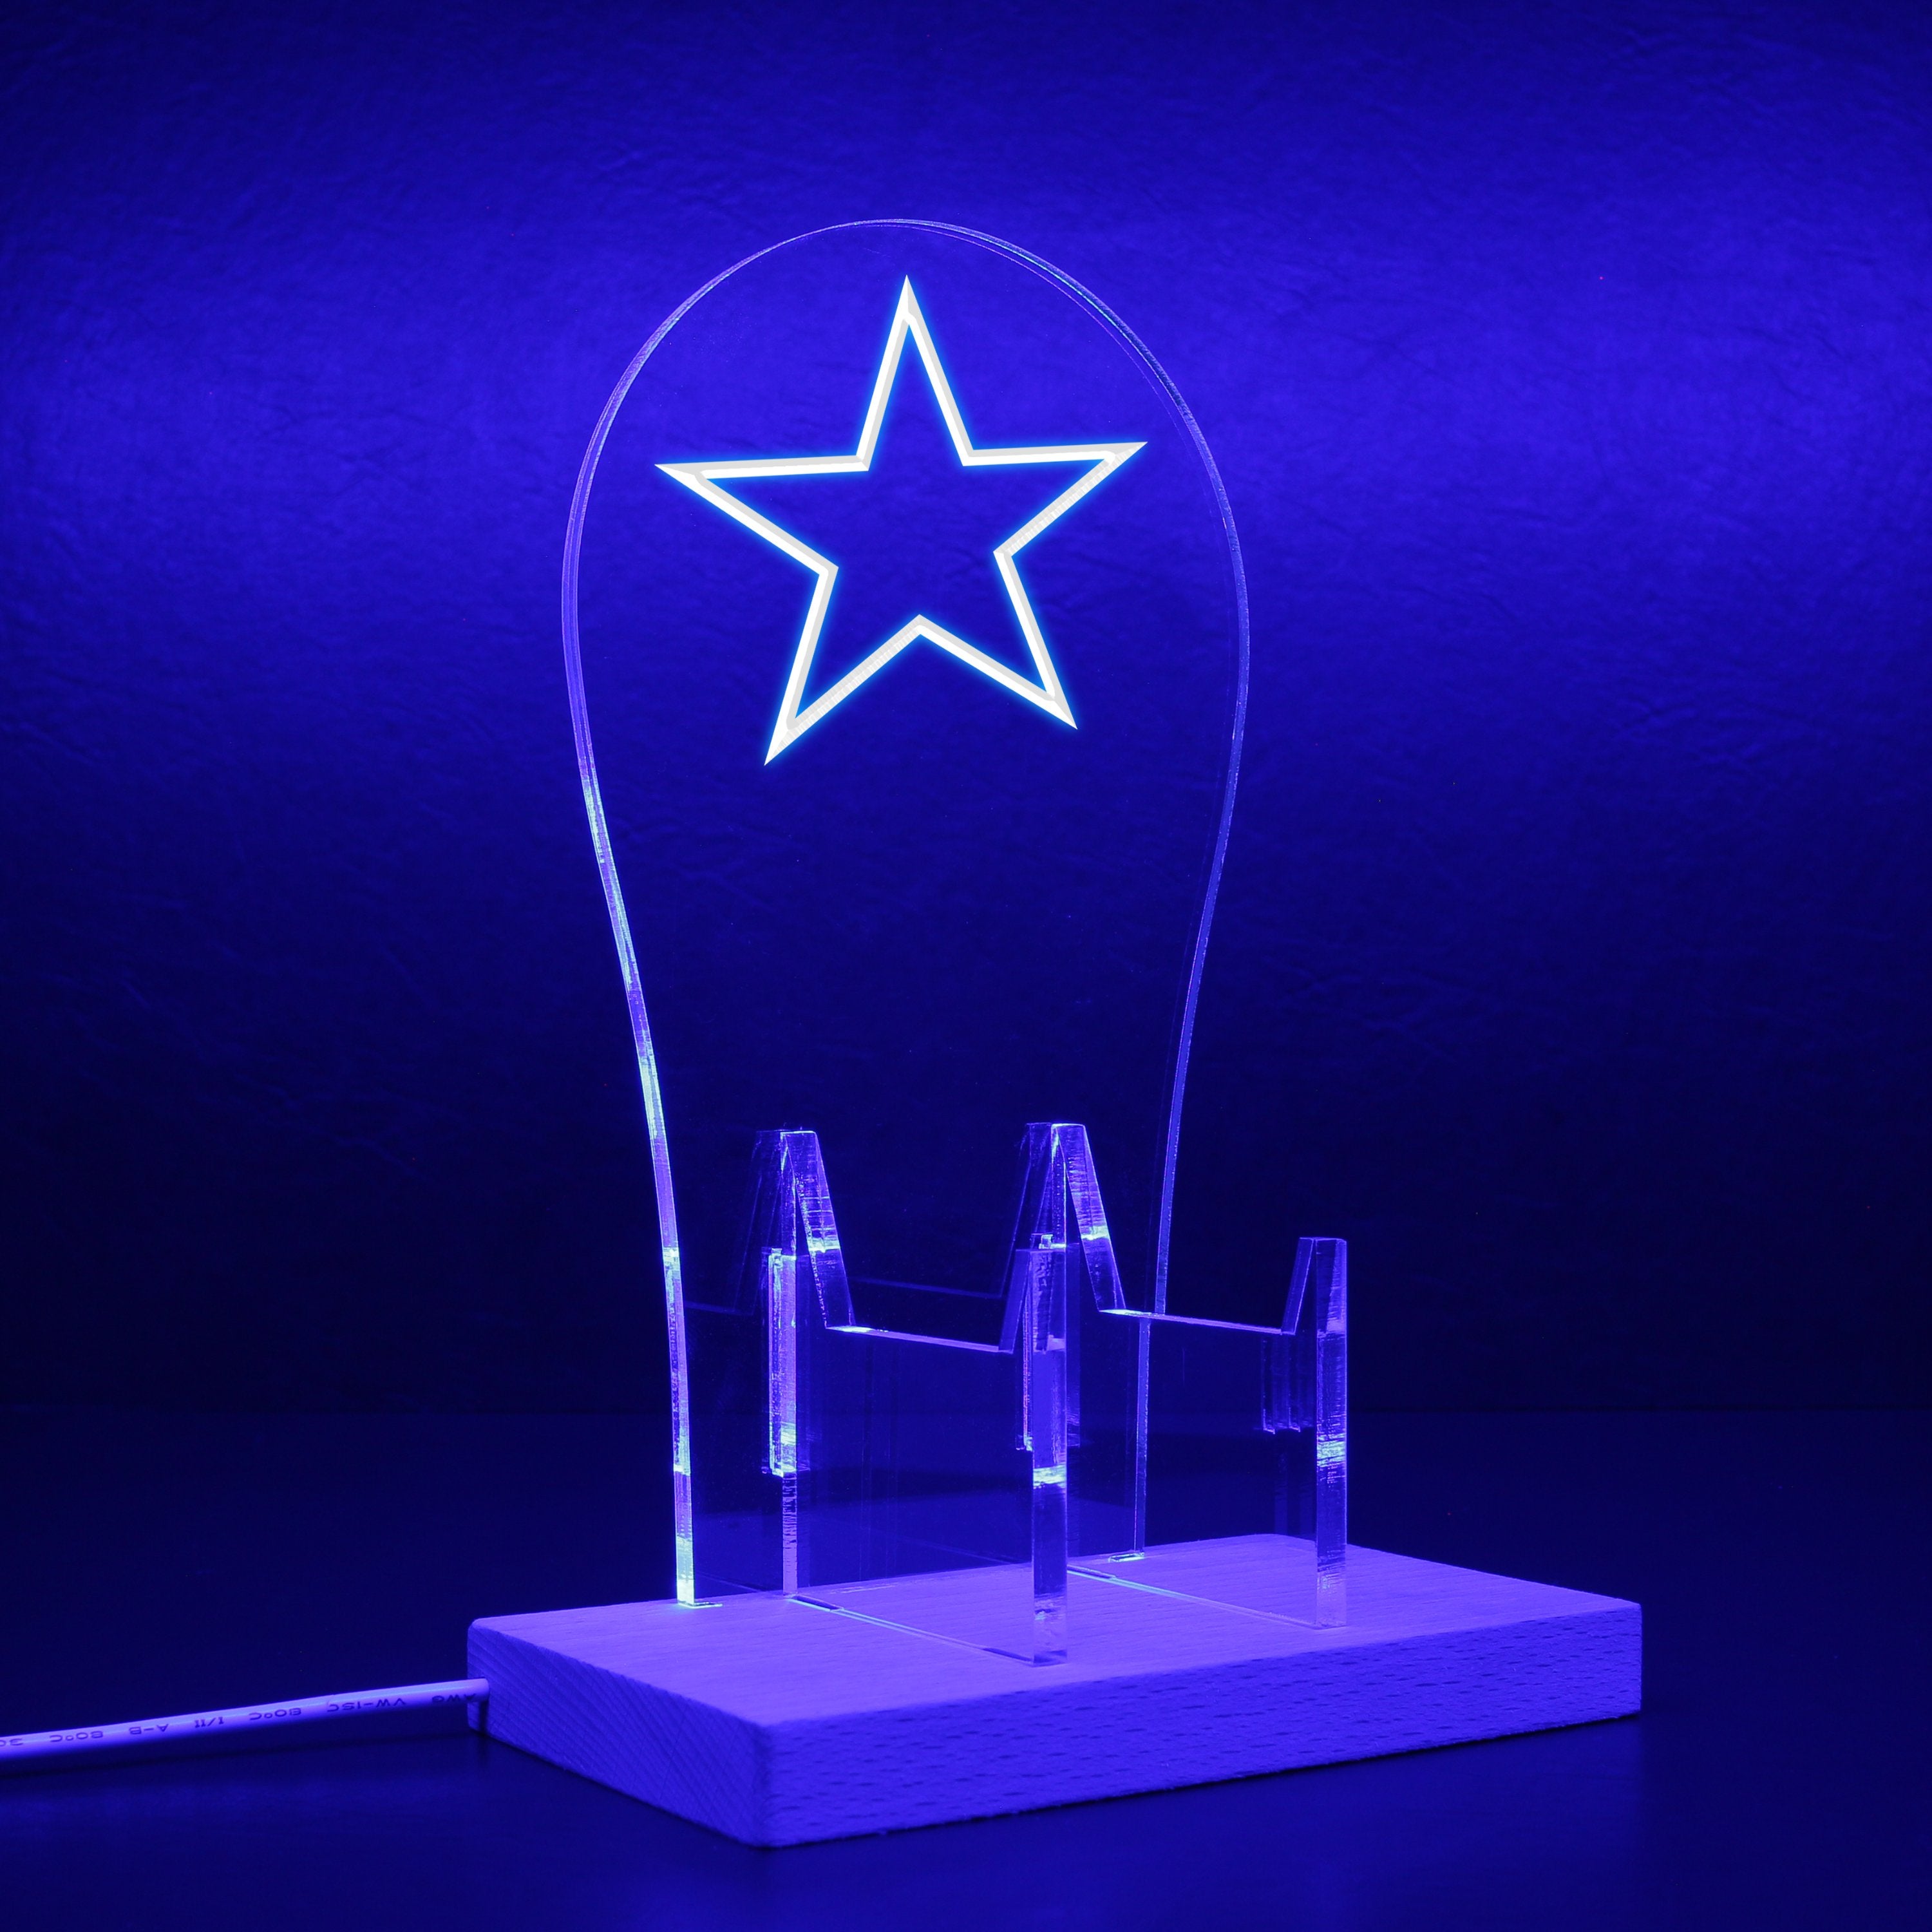 Dallas Cowboys primary logo in use from 1960-1963 RGB LED Gaming Headset Controller Stand